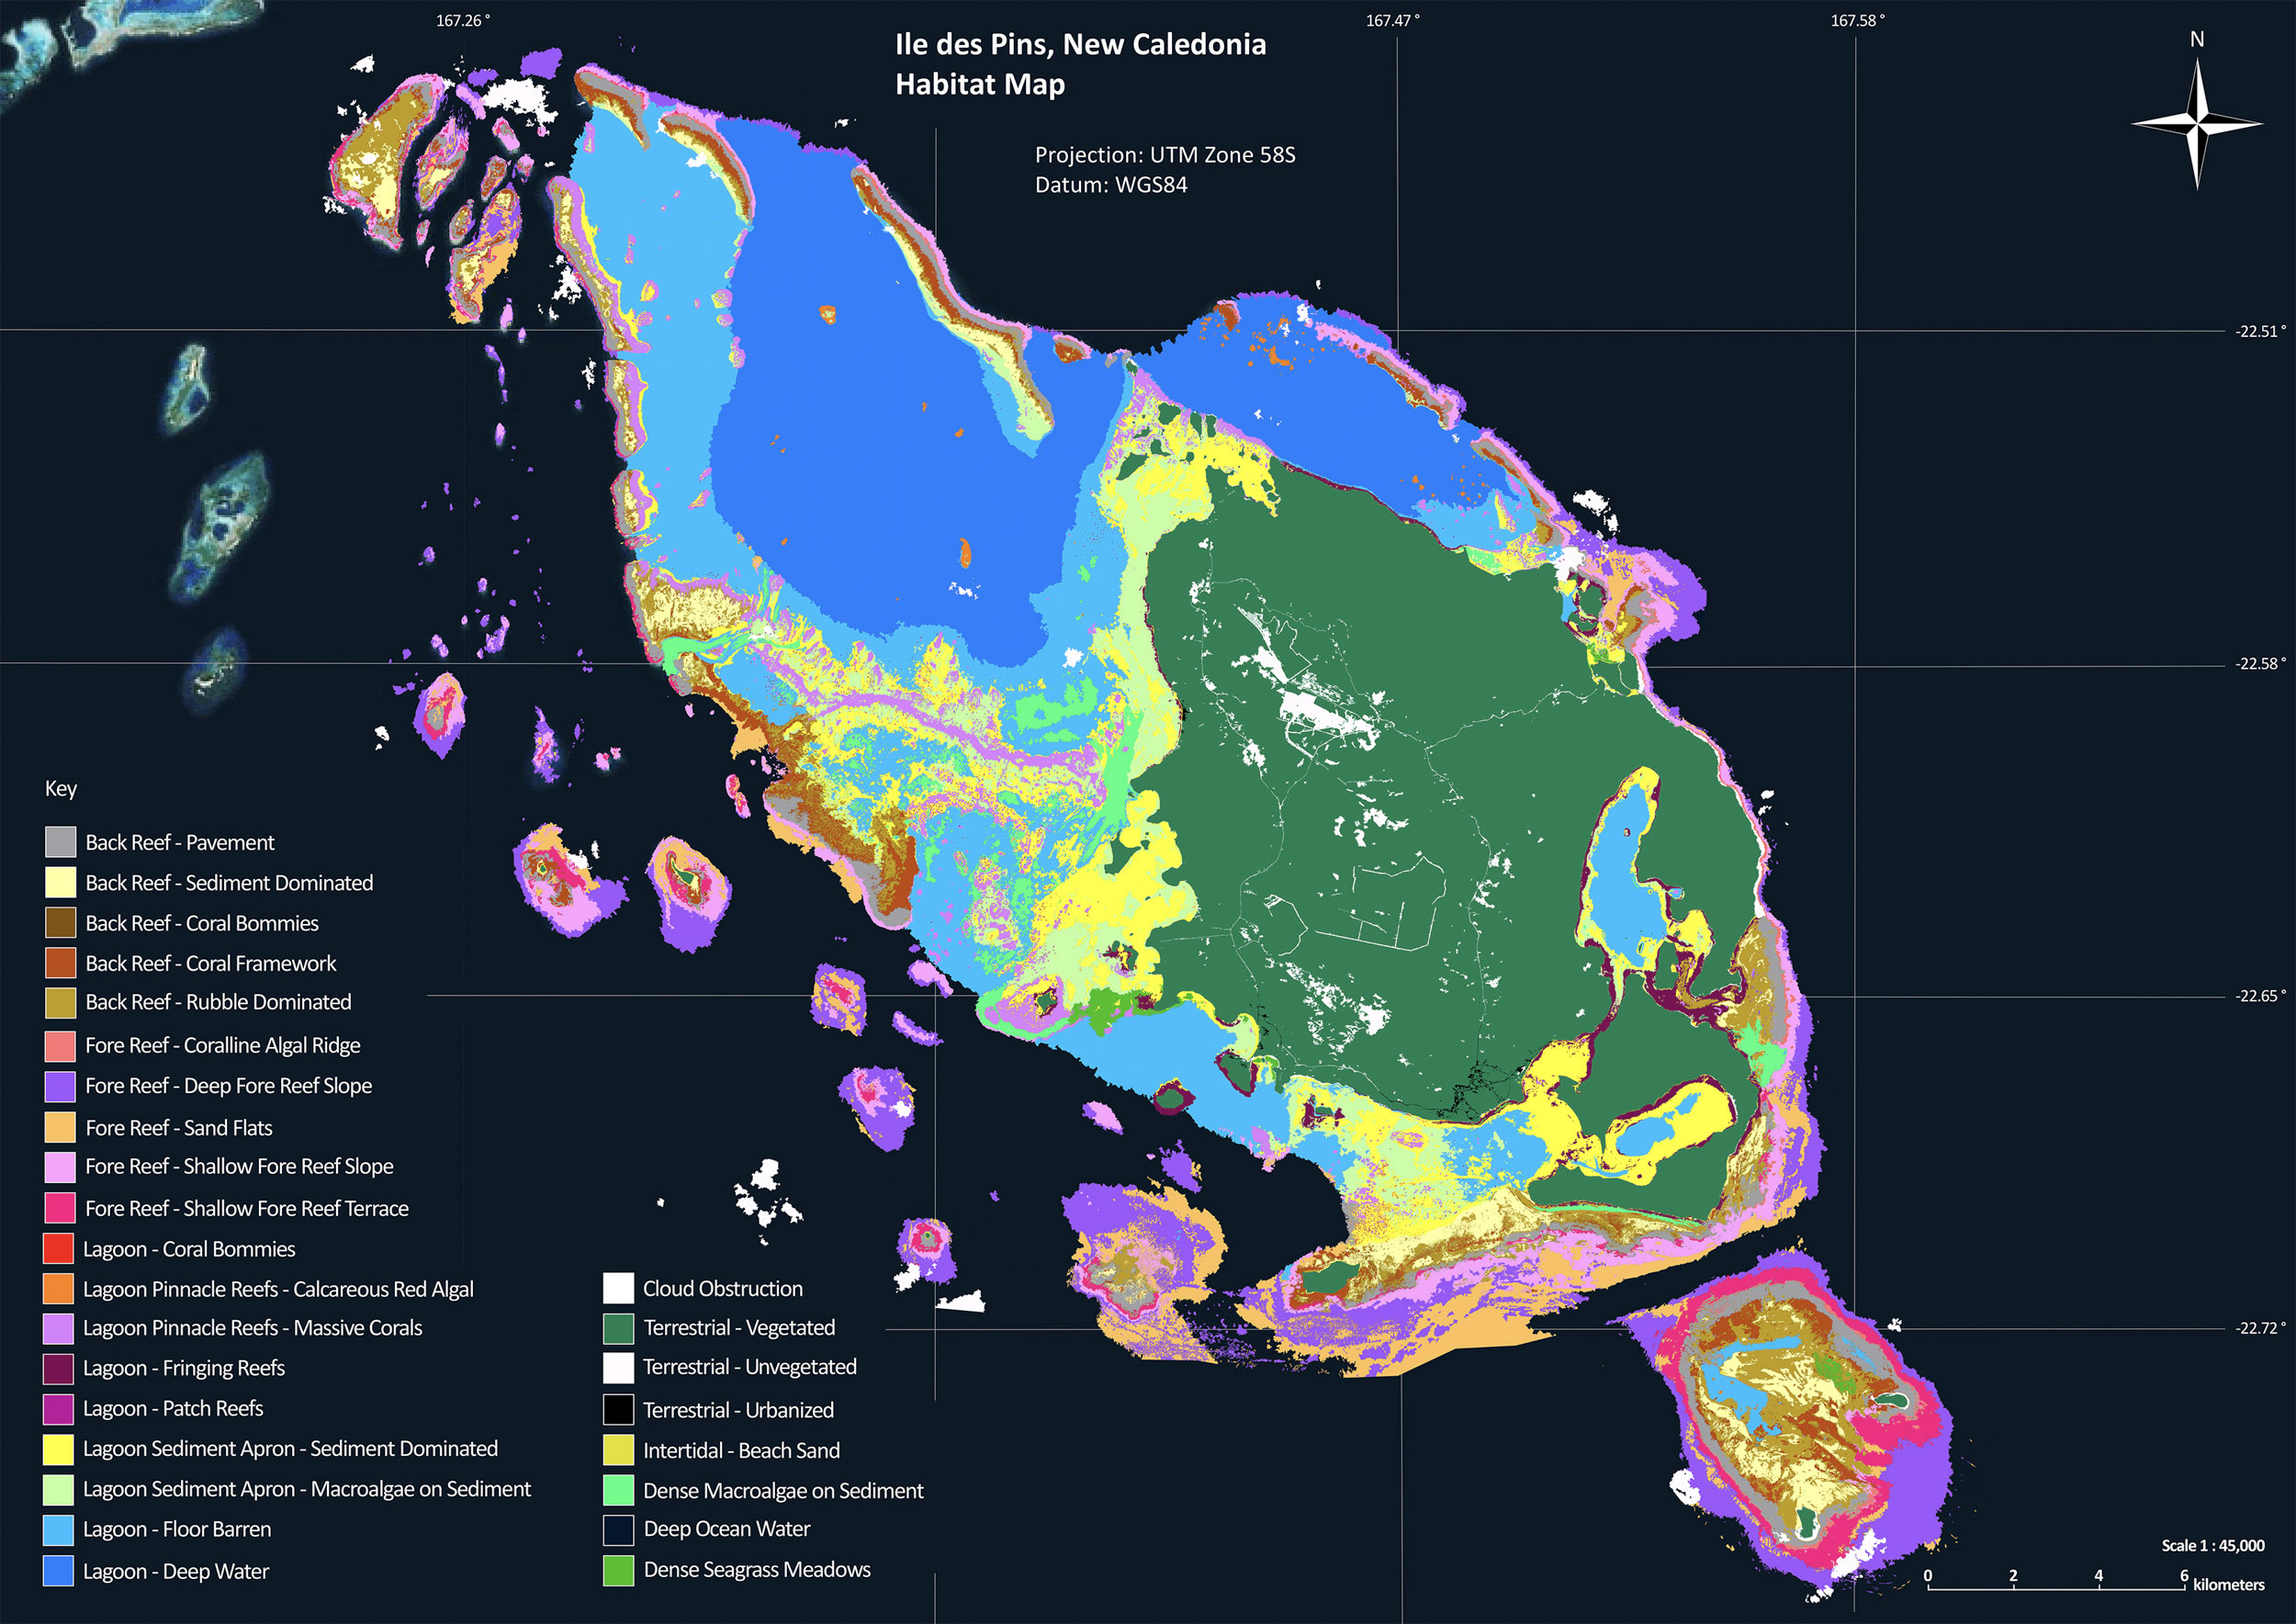 The Global Reef Expedition resulted in the creation of 65,000 square kilometers of high-resolution coral reef habitat maps —or about one-fifth of the world’s coral reefs.